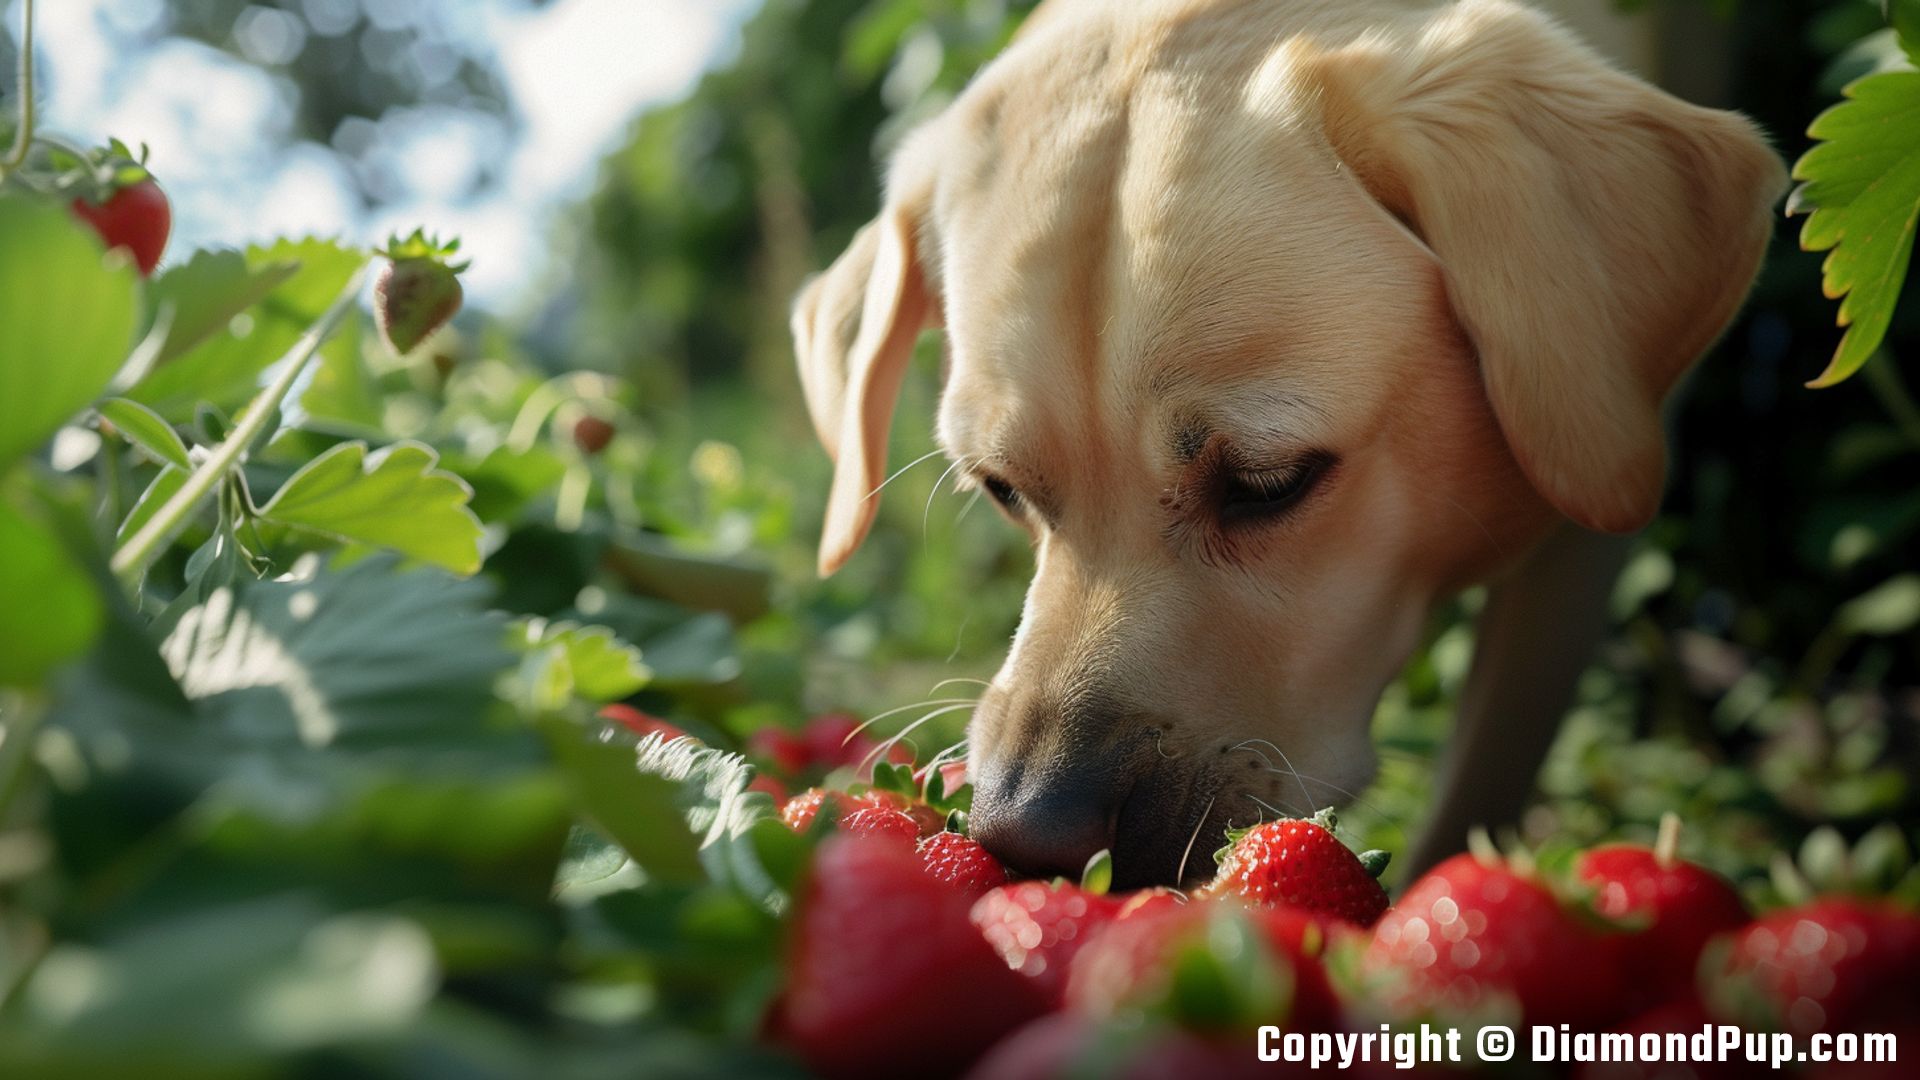 Image of an Adorable Labrador Snacking on Strawberries